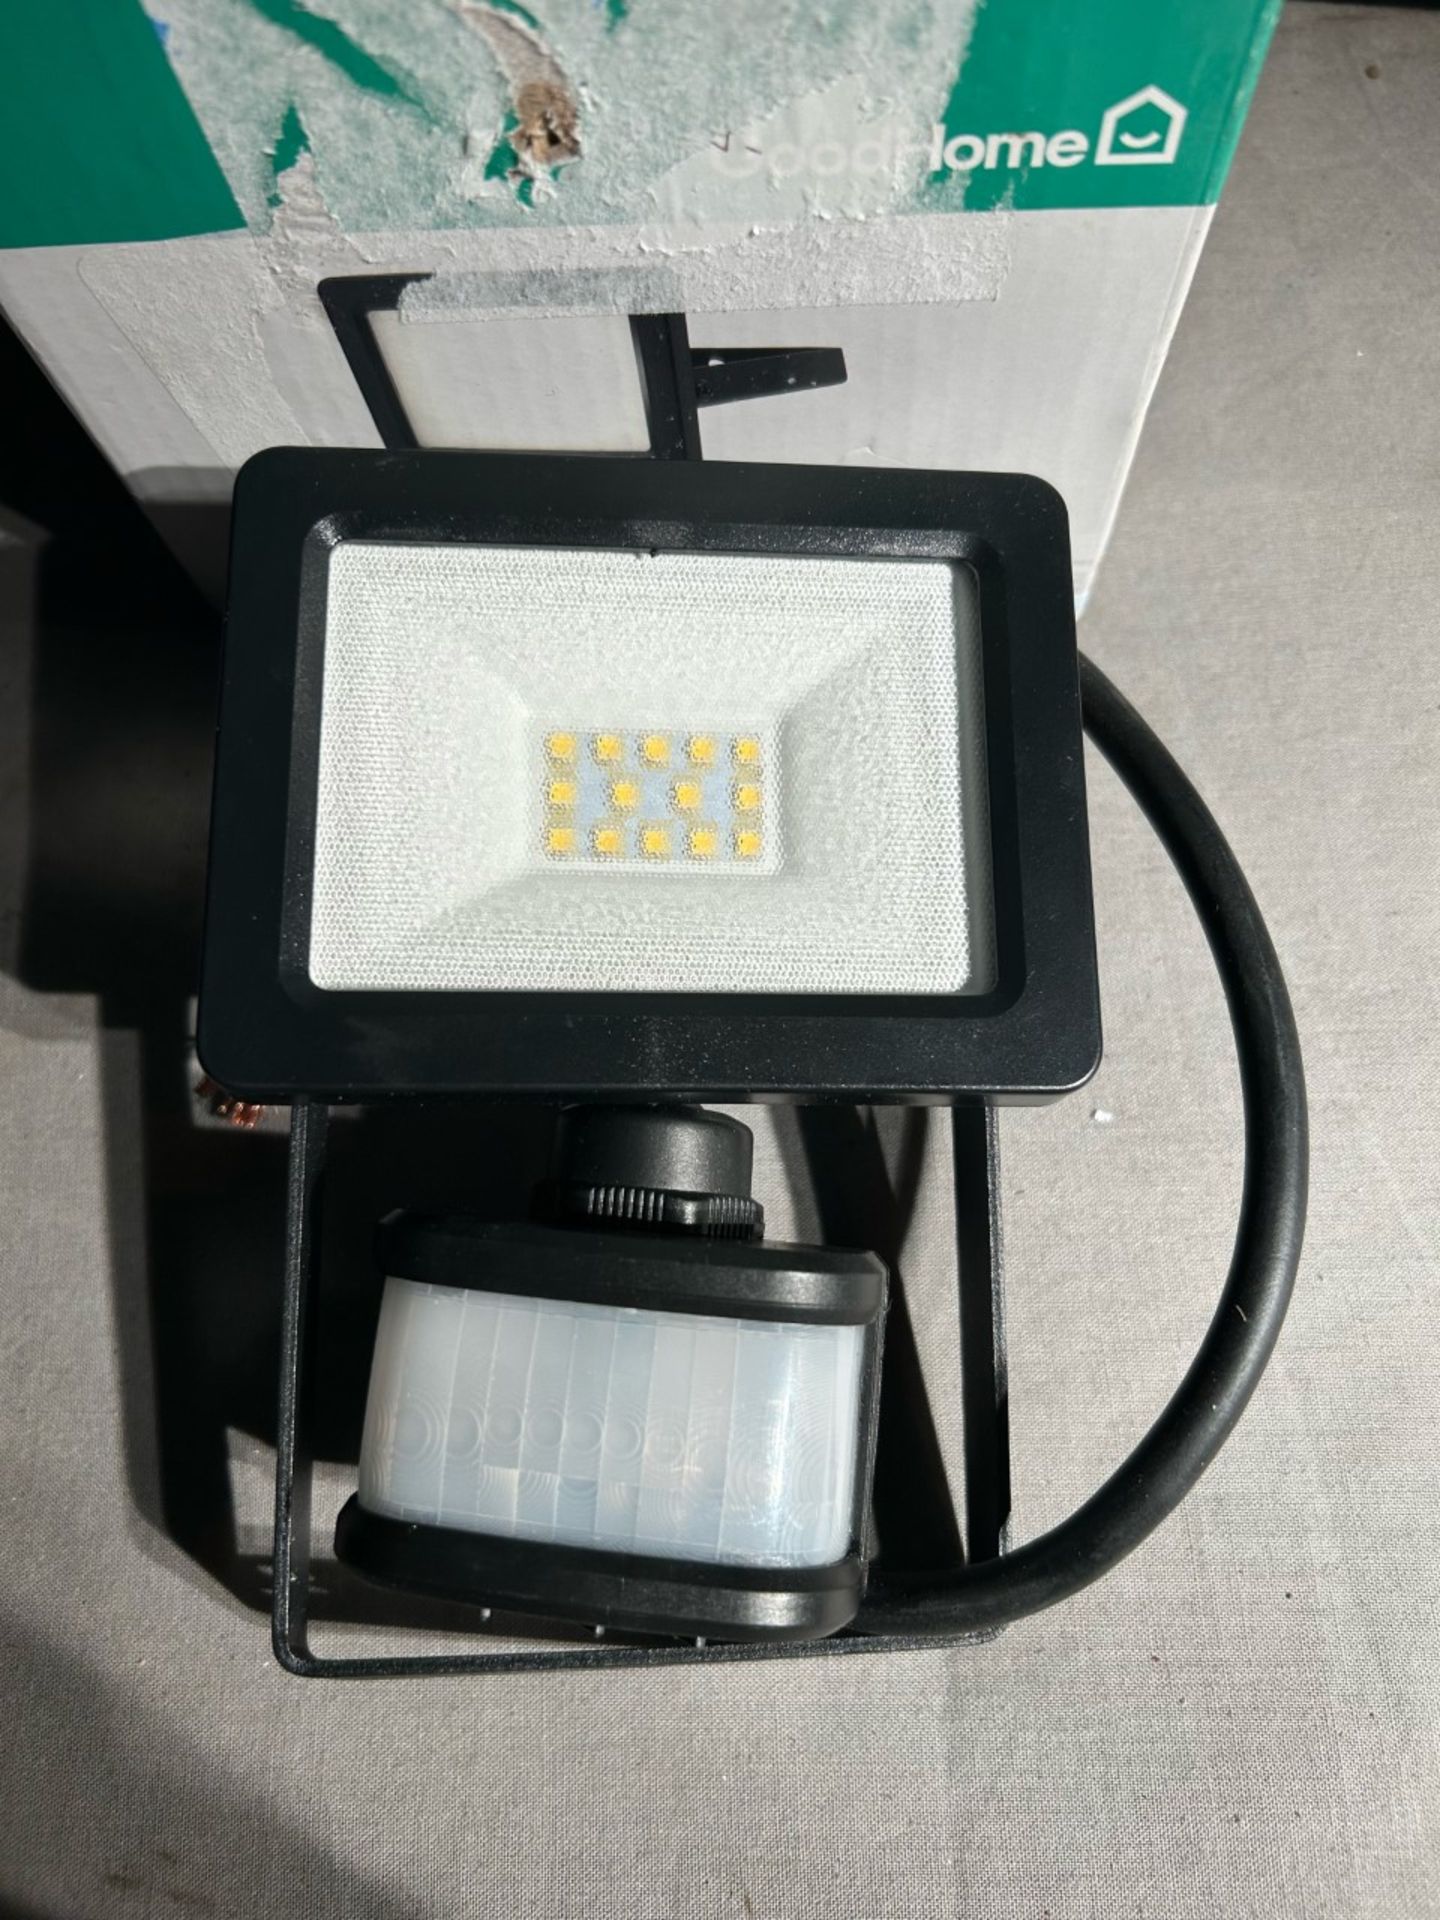 New in box Lucan 10W intergrated floodlight - Image 2 of 2